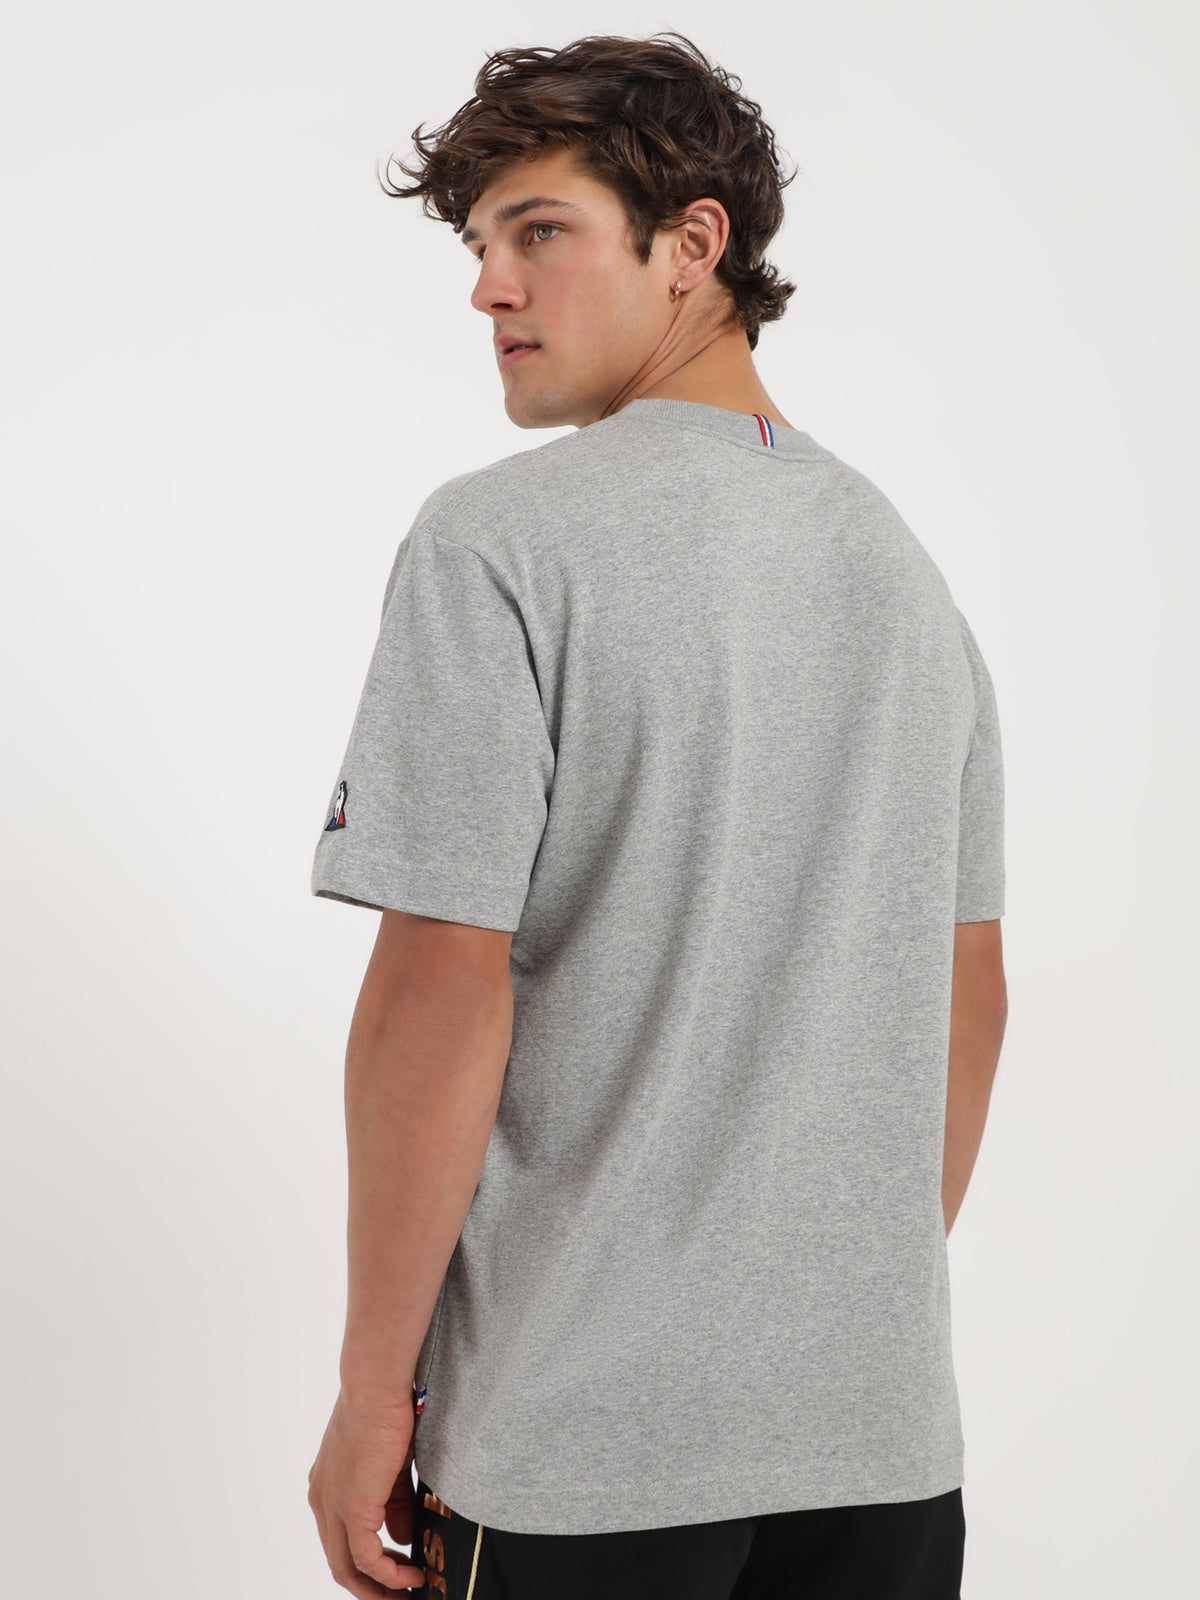 Francaise T-Shirt in Grey Marle